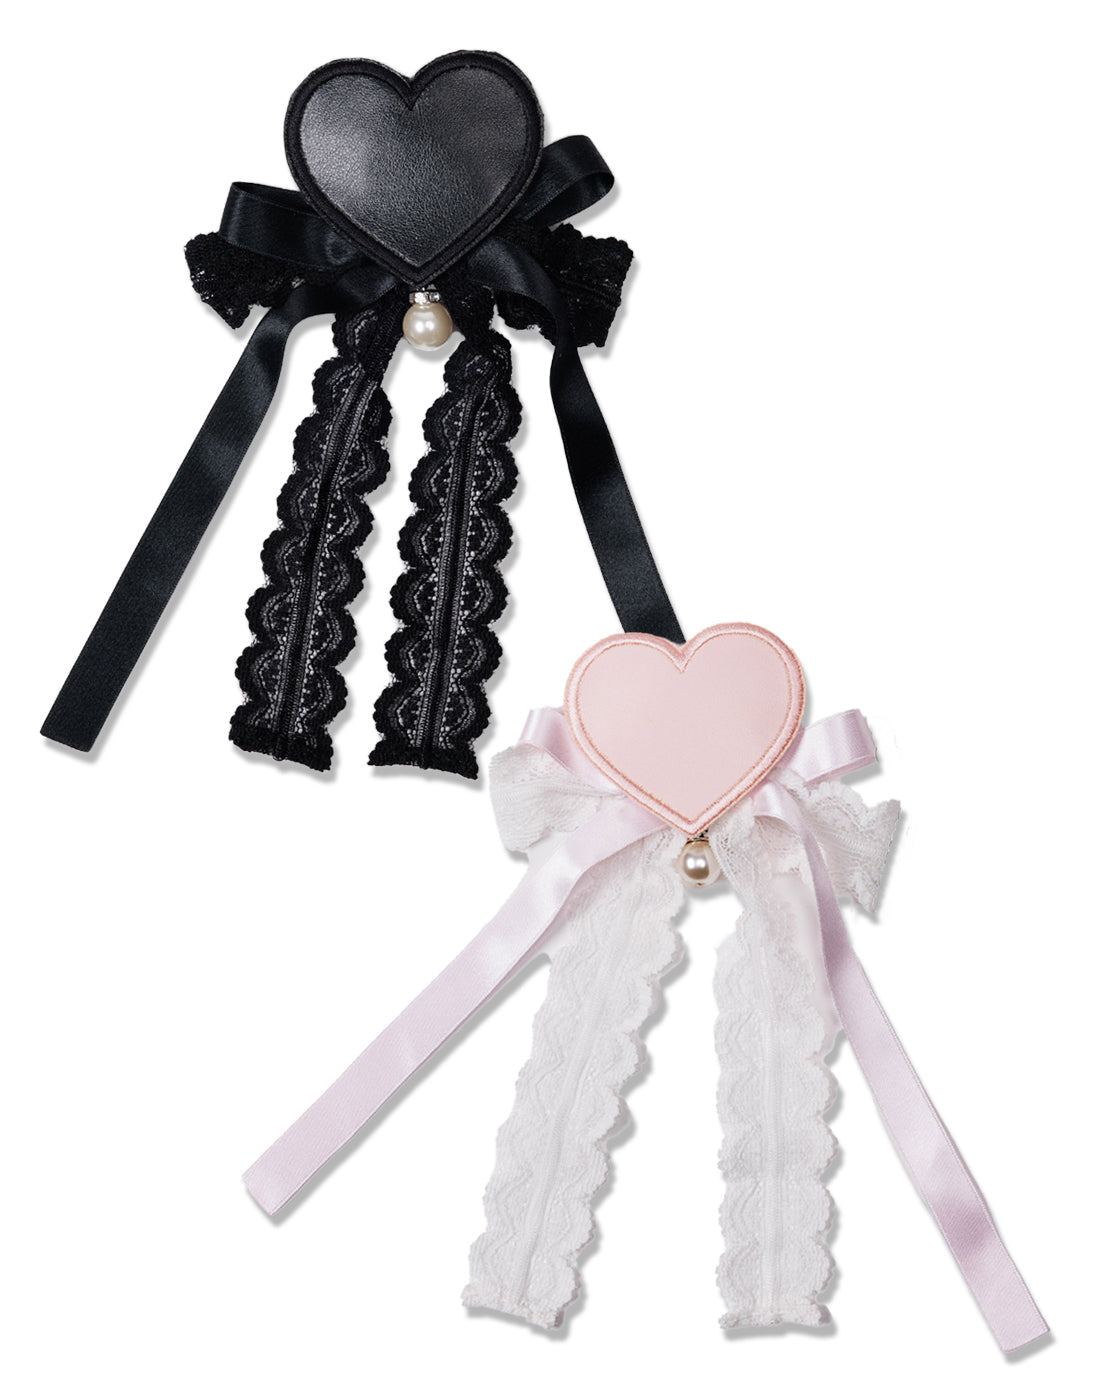 Heart of love accessories［1個売り］